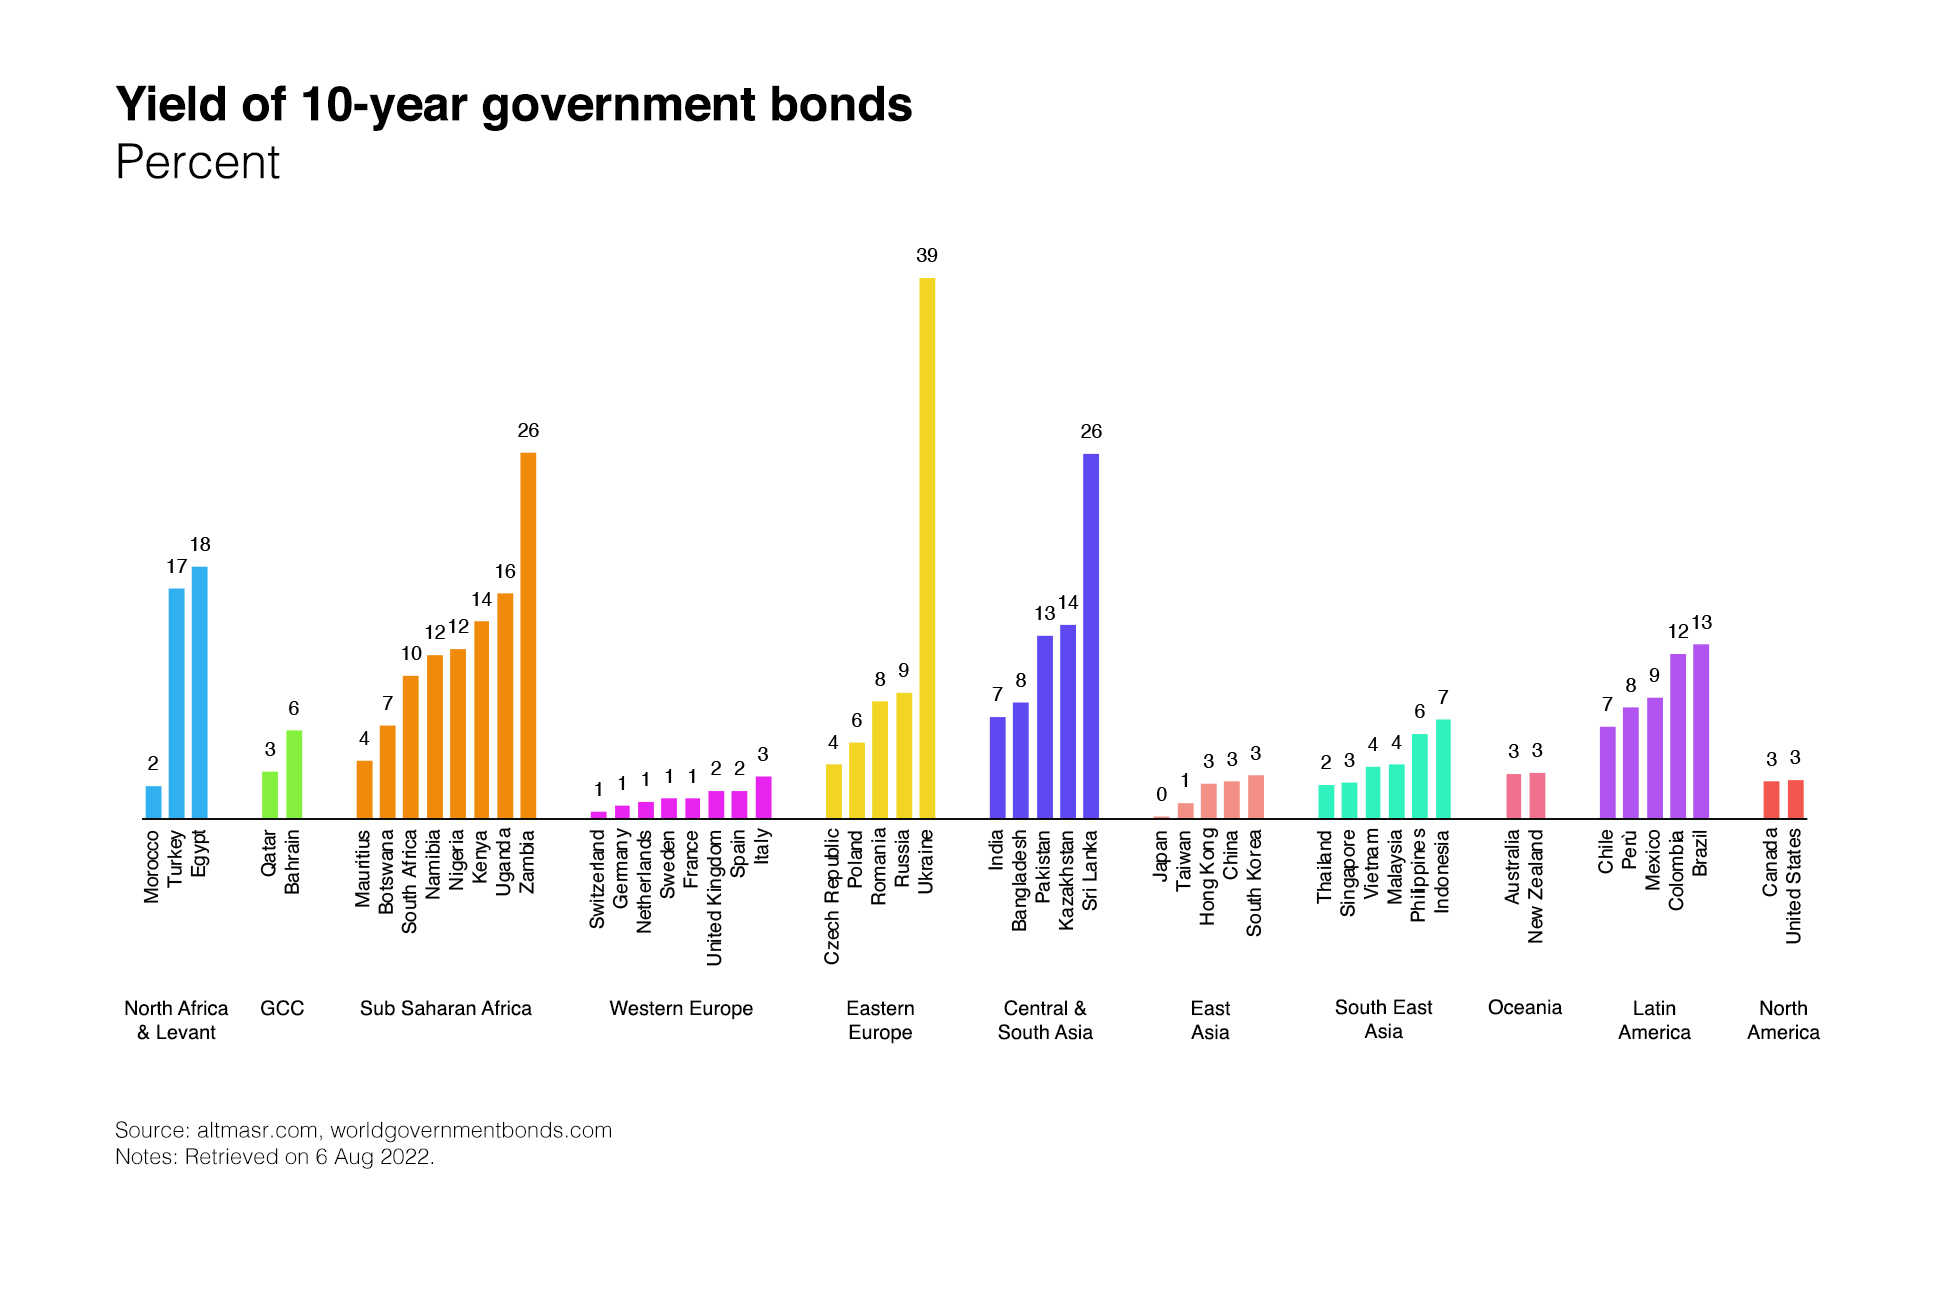 A chart showing the yields on 10-year treasury bonds for several governments across the world